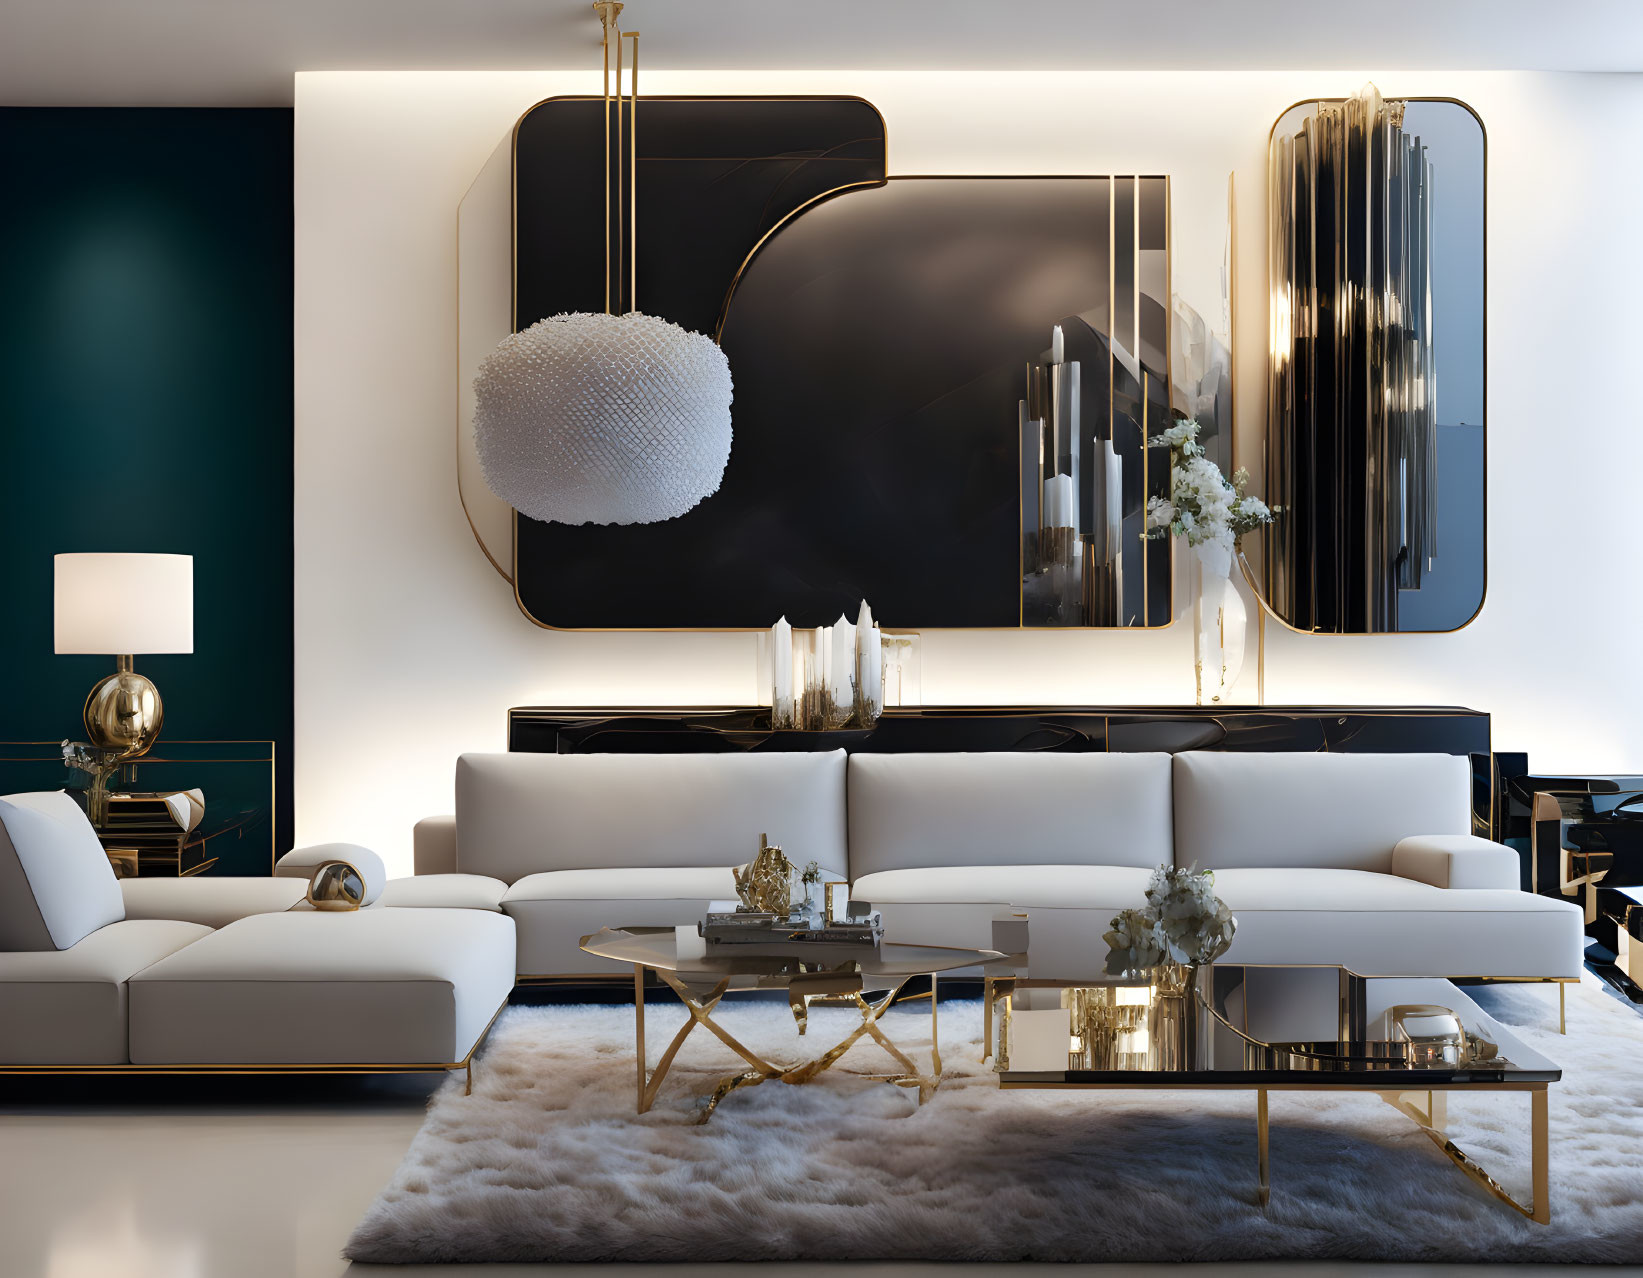 Stylish modern living room with white sofas, gold tables, artistic mirrors, plush rug, blue